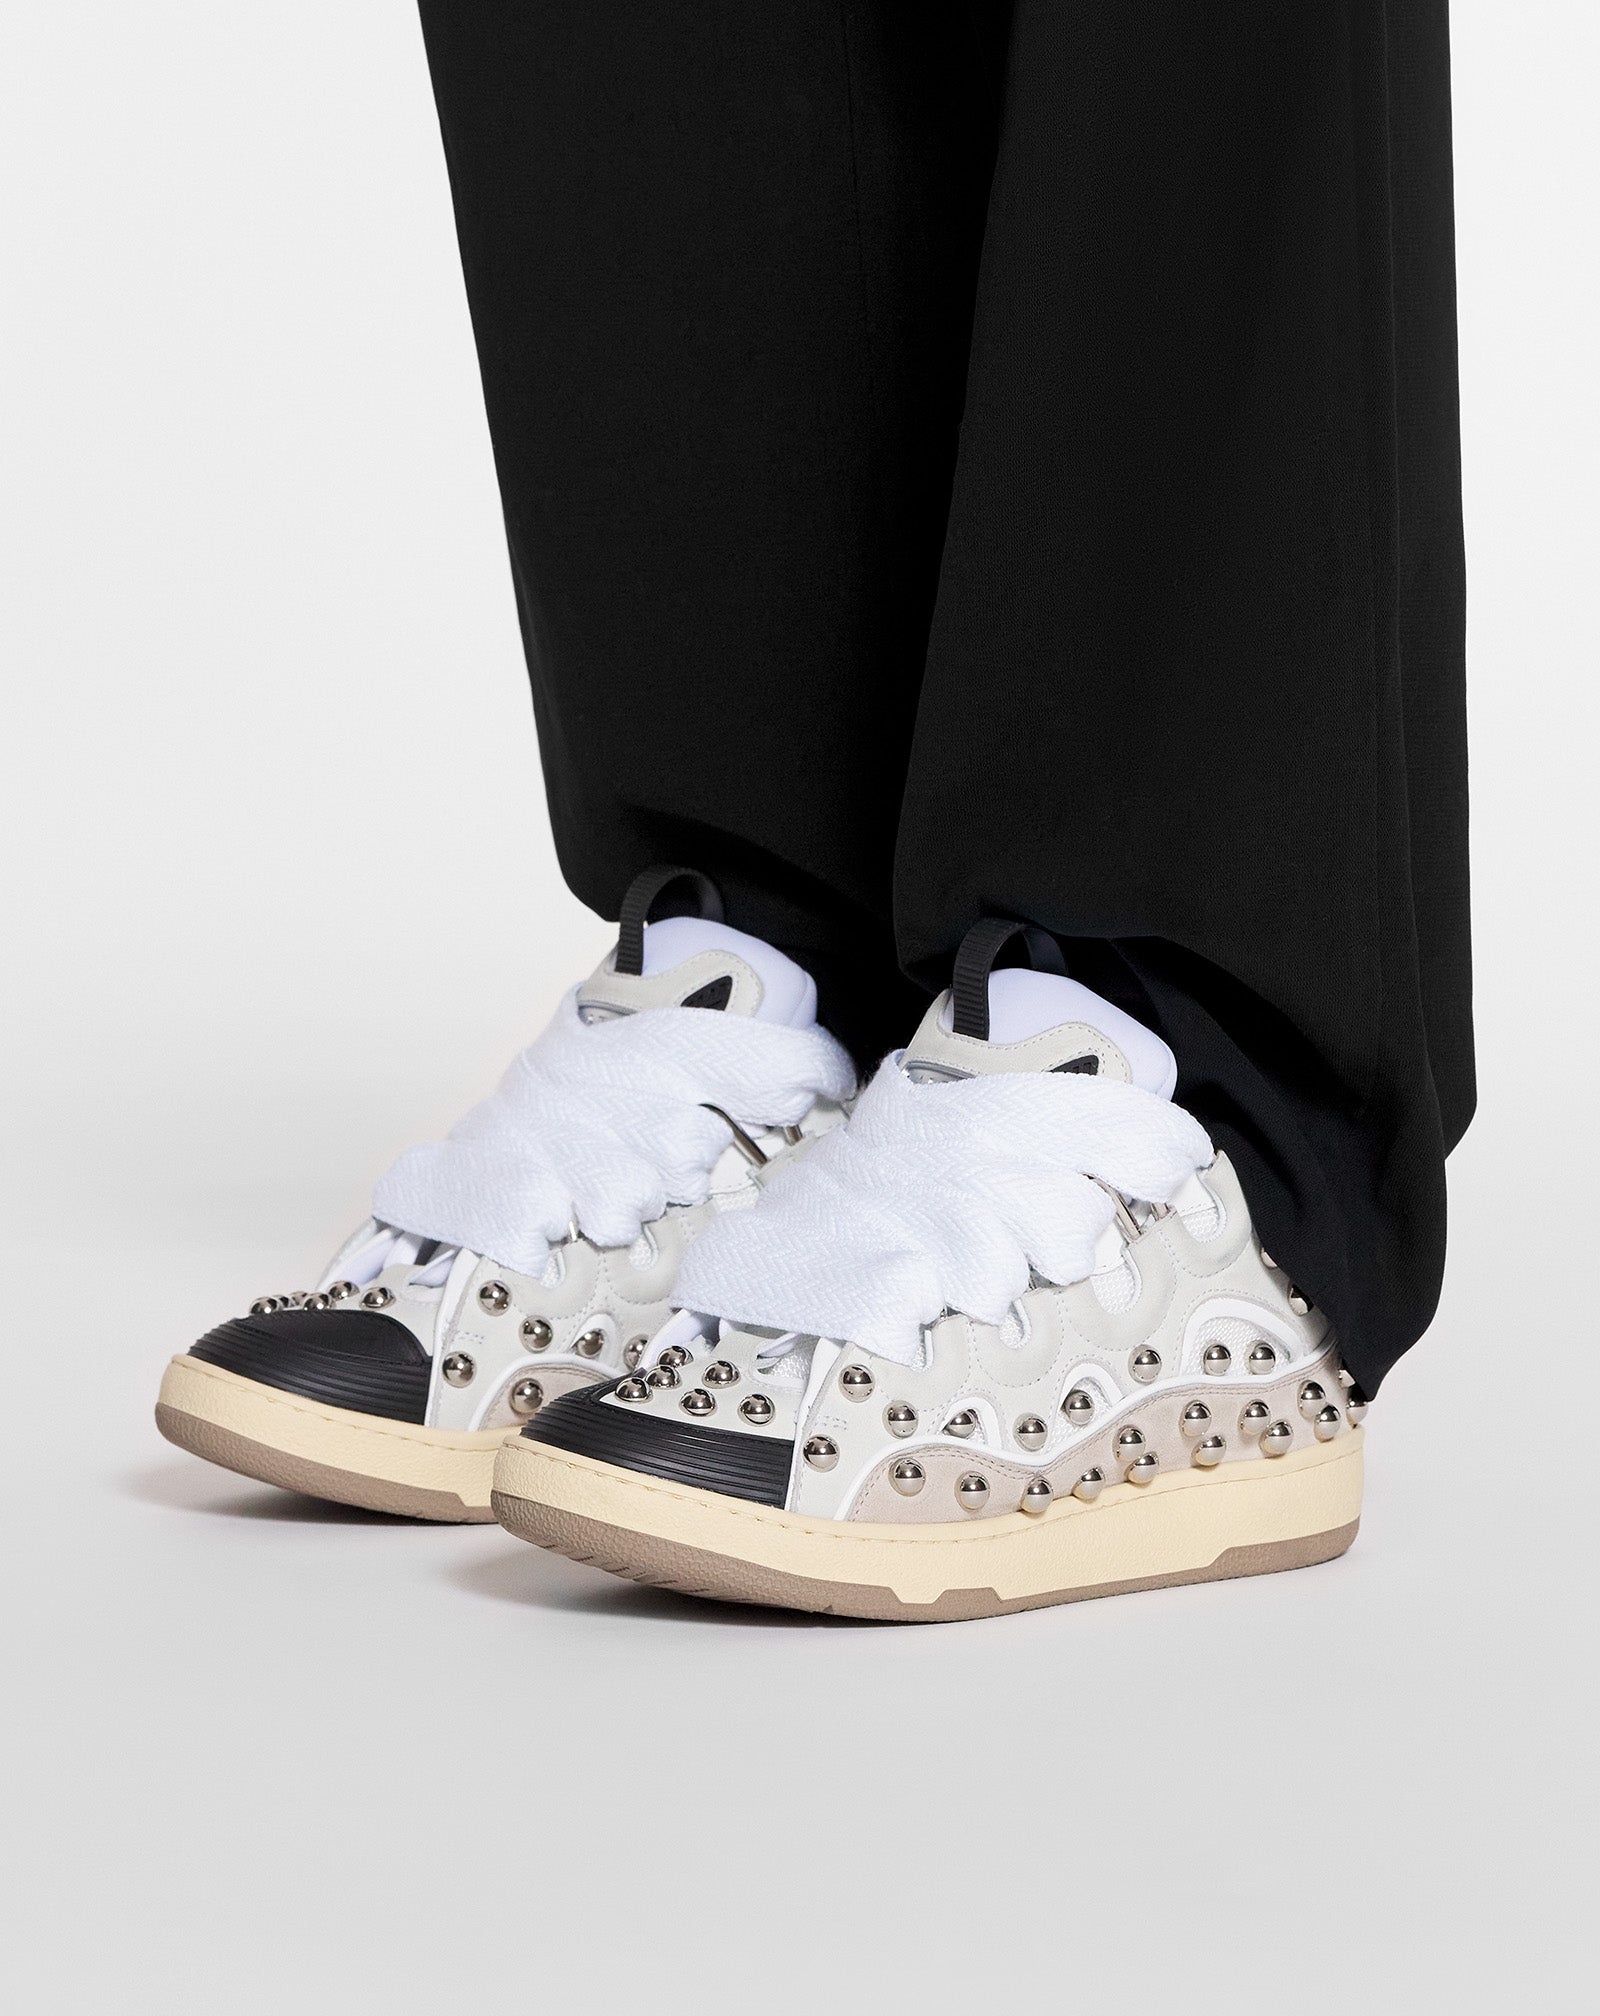 Lanvin Studded Leather Curb Sneaker White (Women's